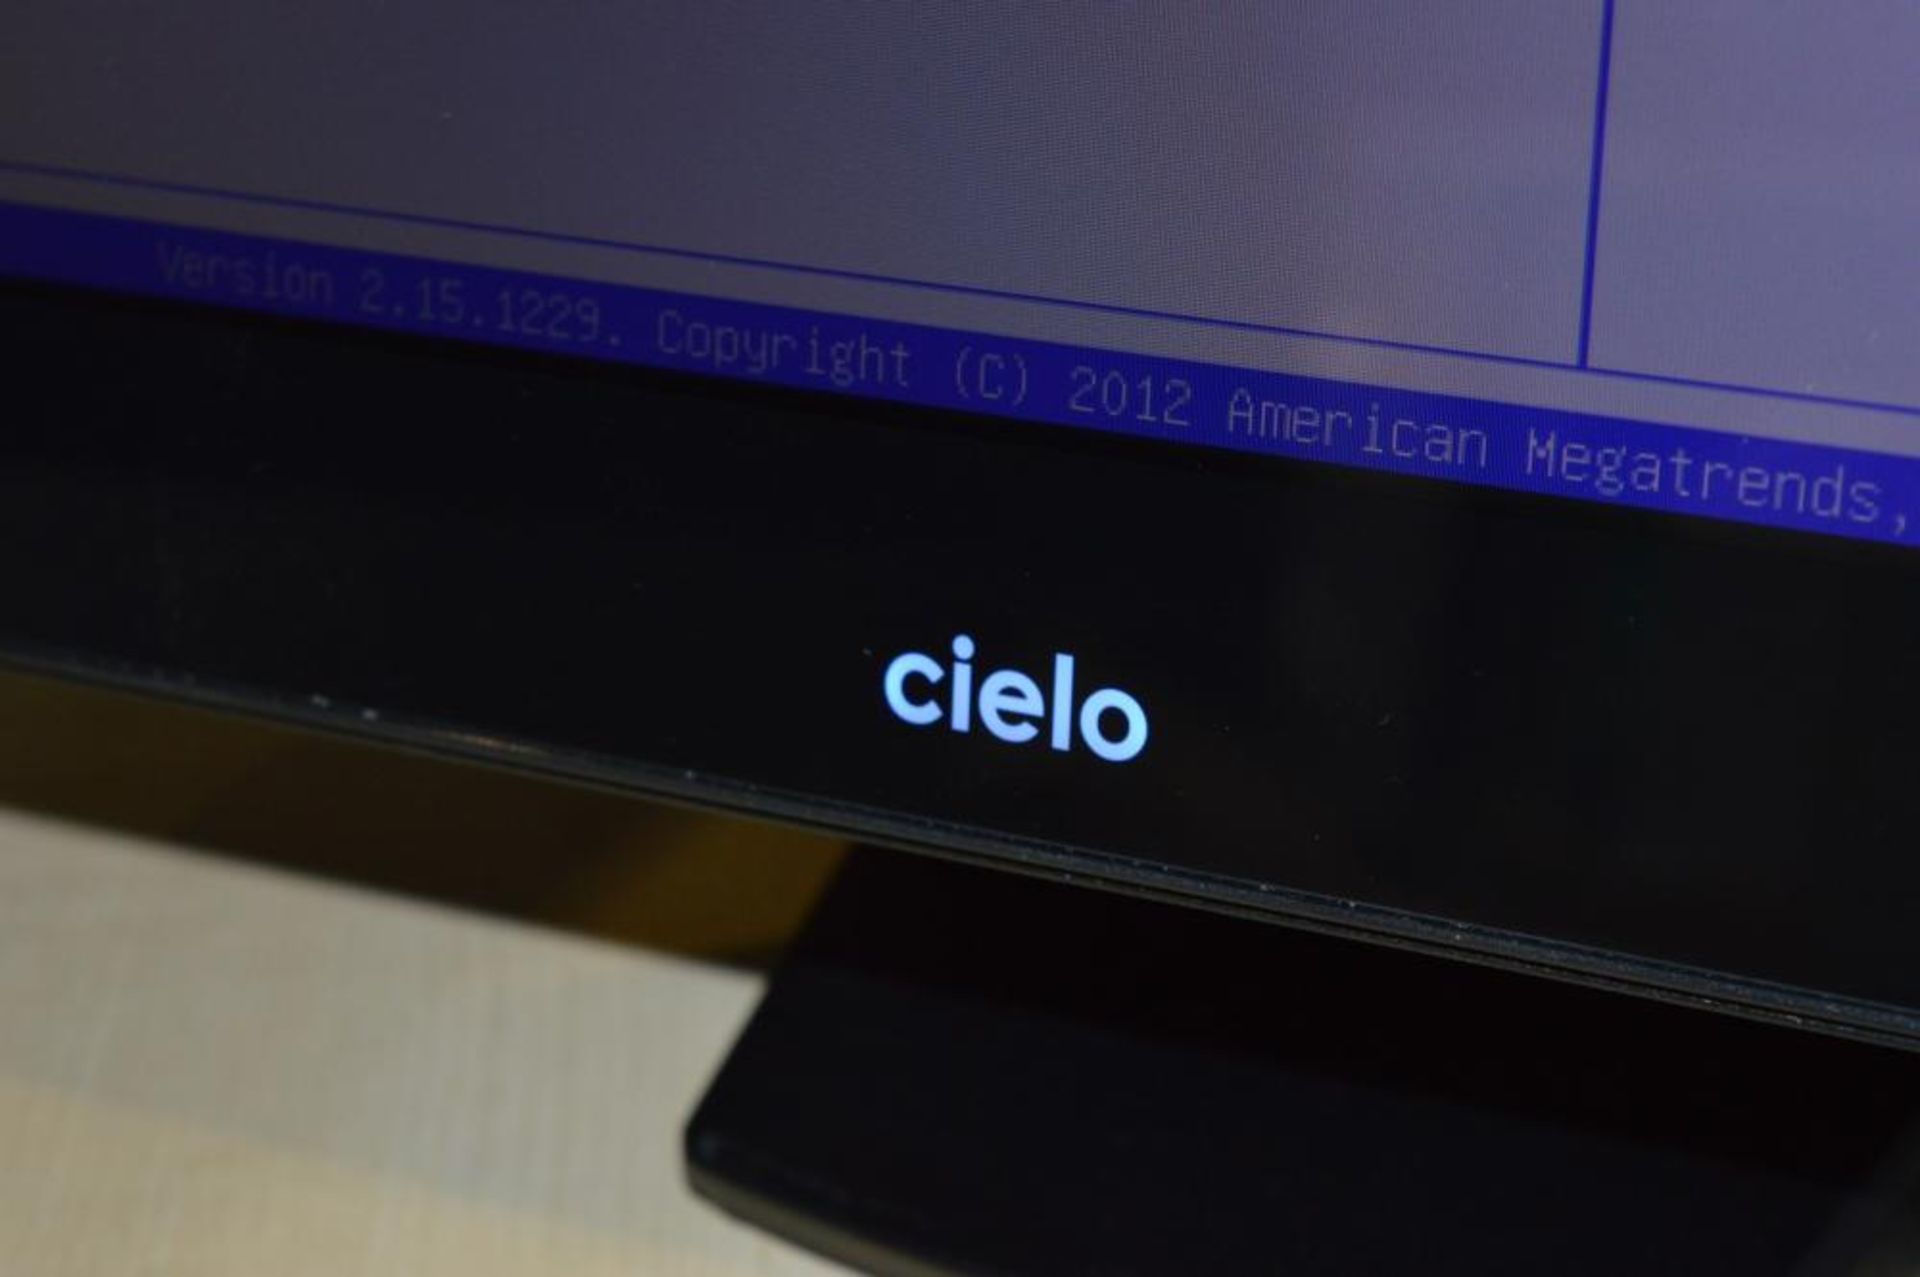 1 x Cielo AP-3615 All in One Desktop Computer POS System - Features Include 15 Inch Touch Screen, - Image 3 of 12